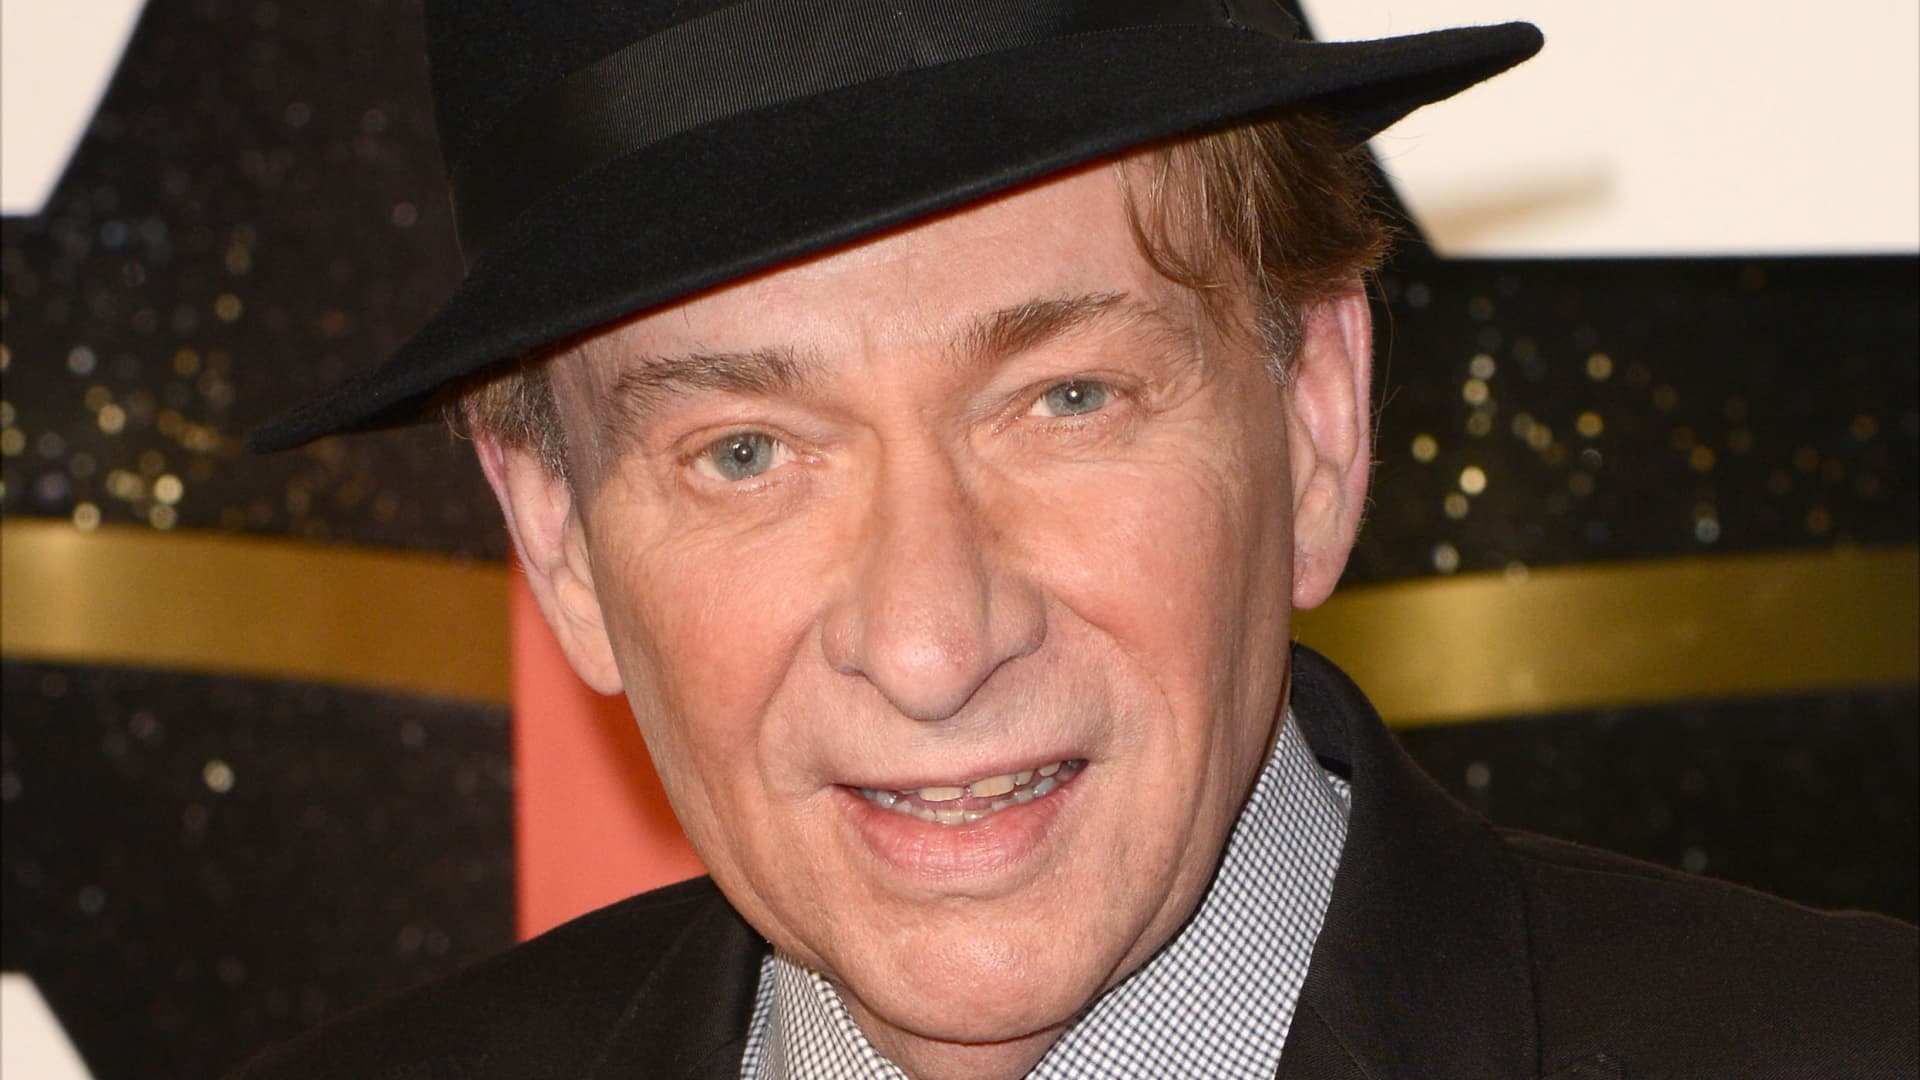 'What You Won't Do for Love' singer Bobby Caldwell dies at 71 - CNBC